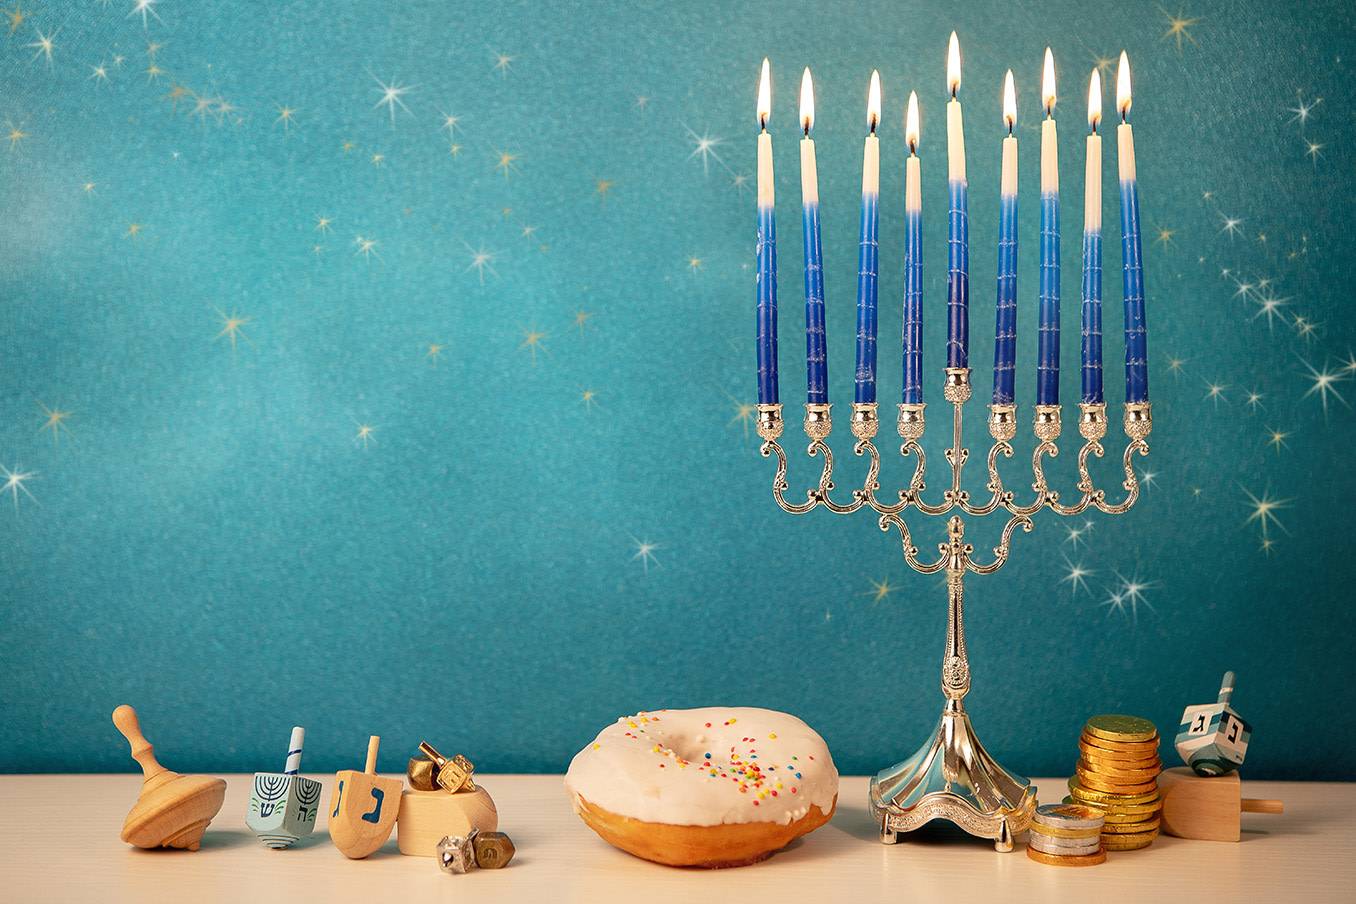 A table is adorned with various symbols of Hannukah including a menorah and dreidels